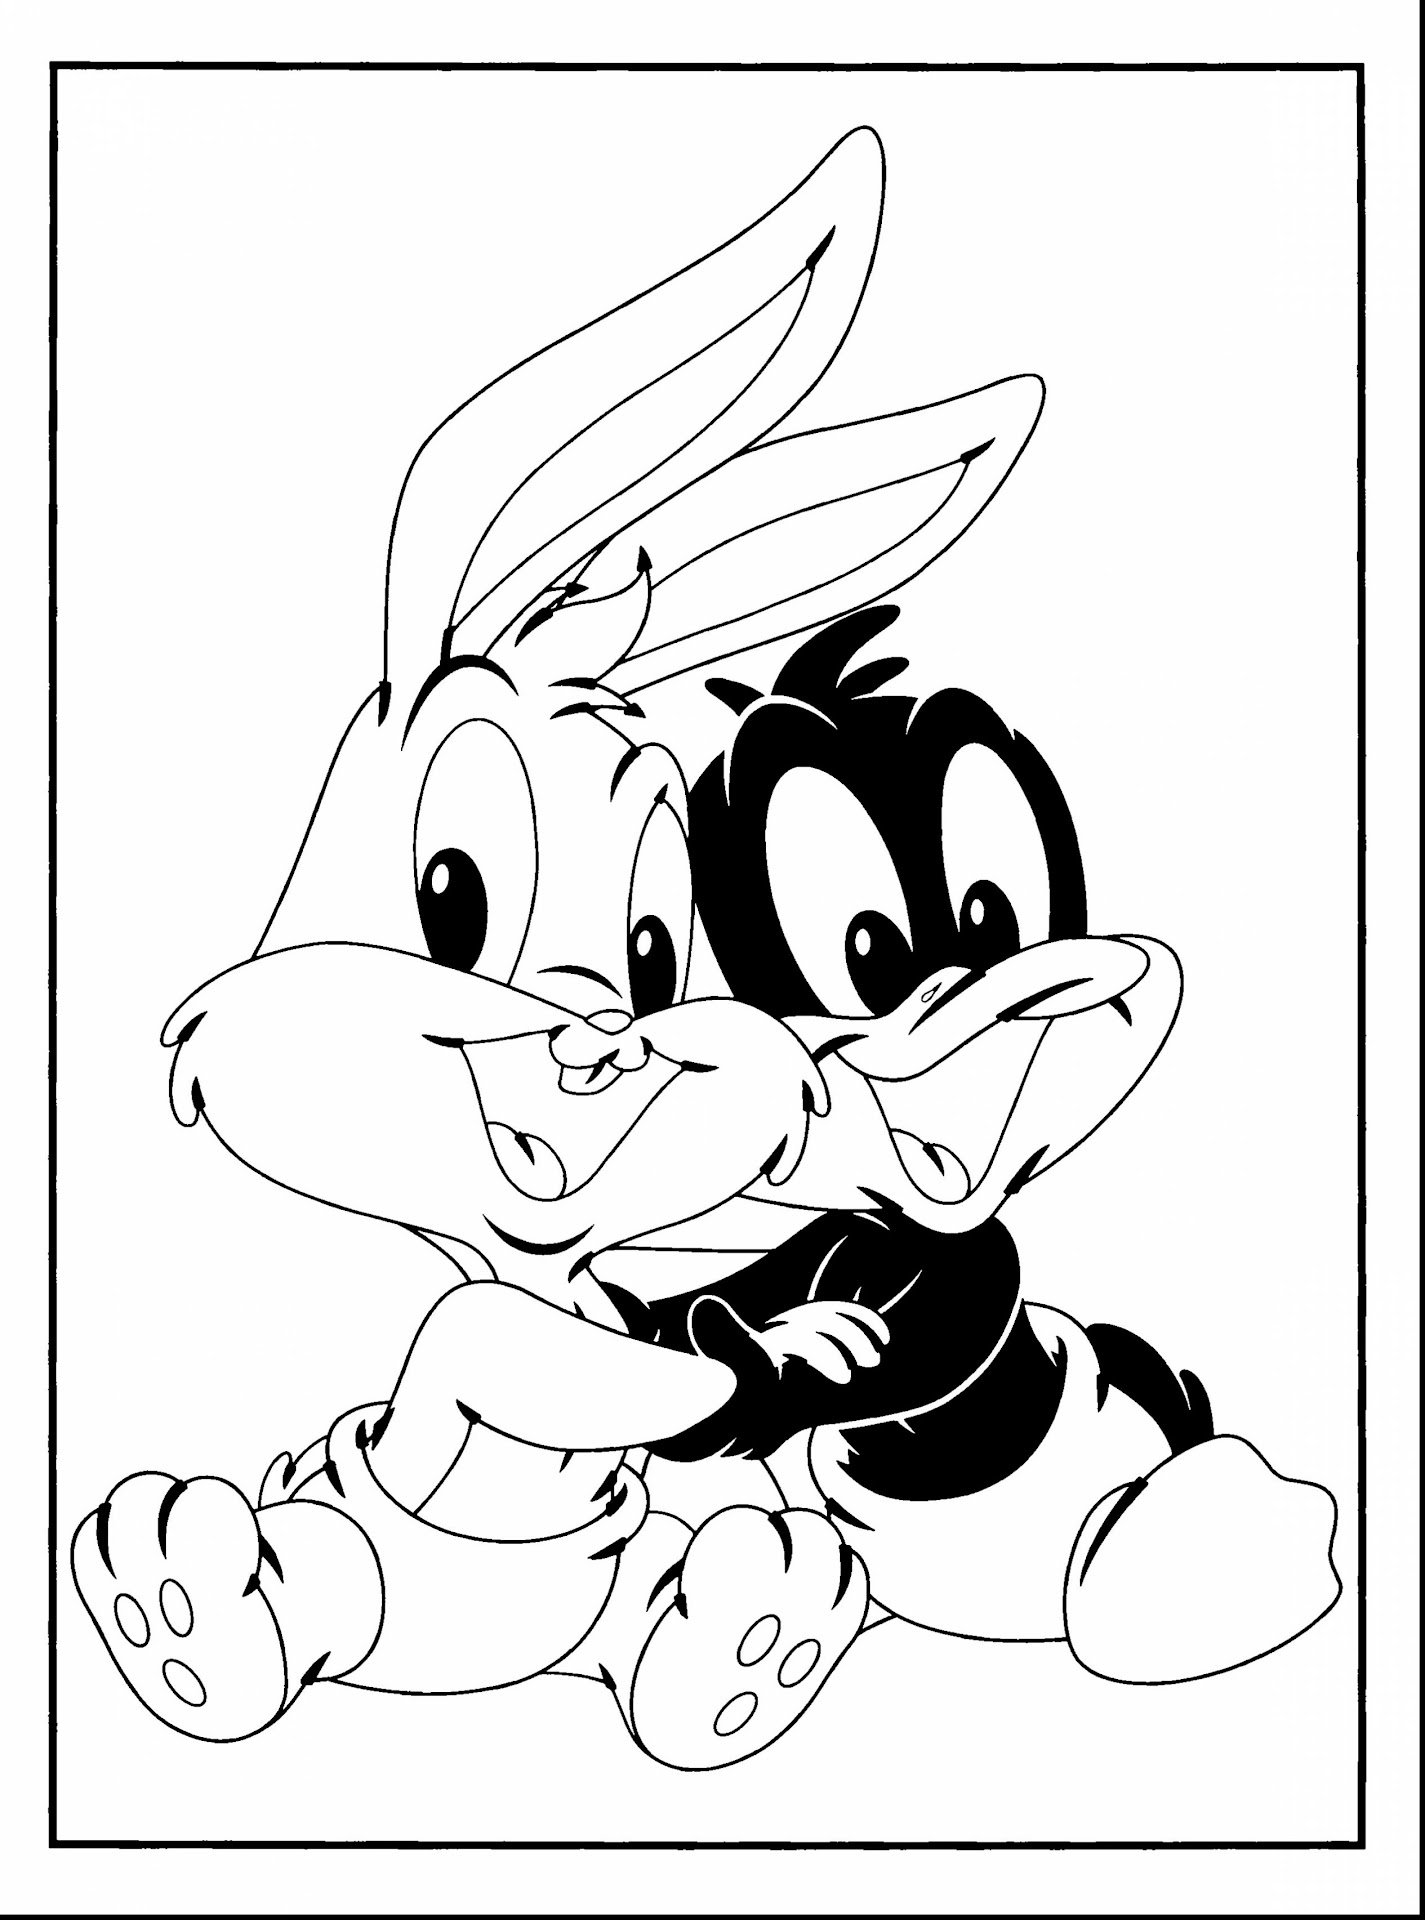 Spectacular Baby Looney Tunes Coloring Pages With Bugs Bunny Coloring Pages And Bugs Bunny Basketball Coloring